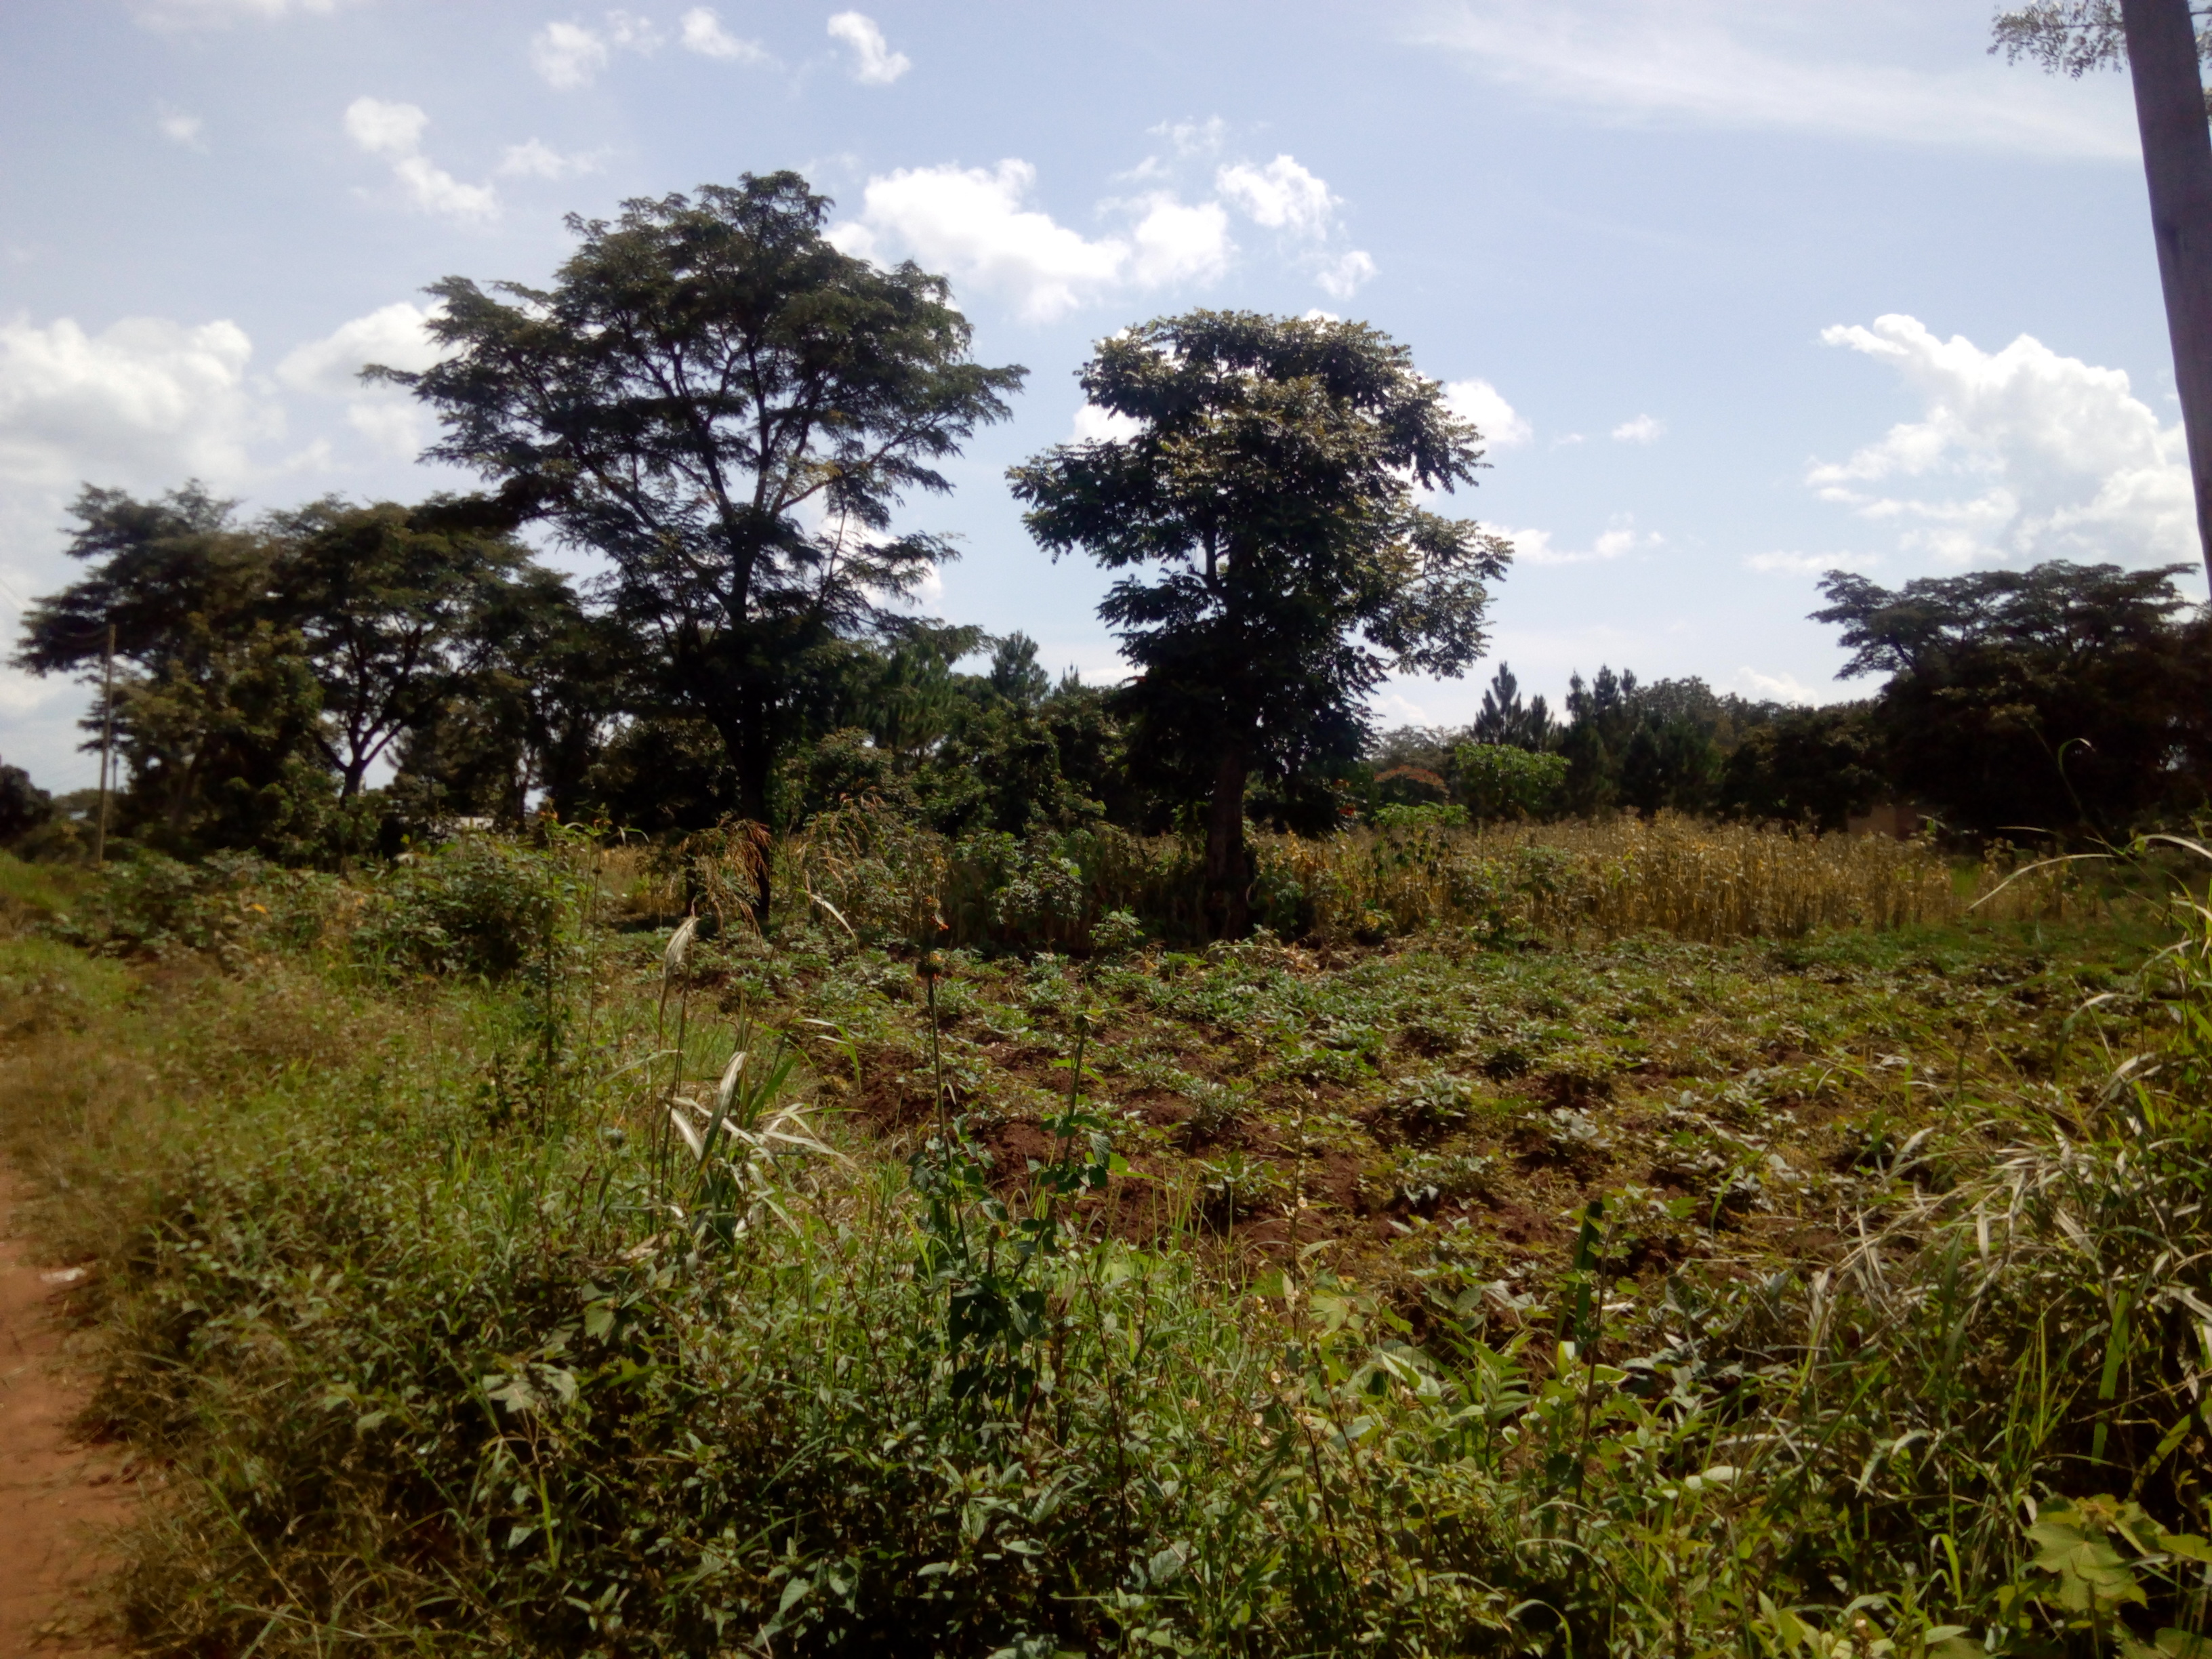 Scattered native trees on-farm protect crops such as maize and bananas agaist strong winds